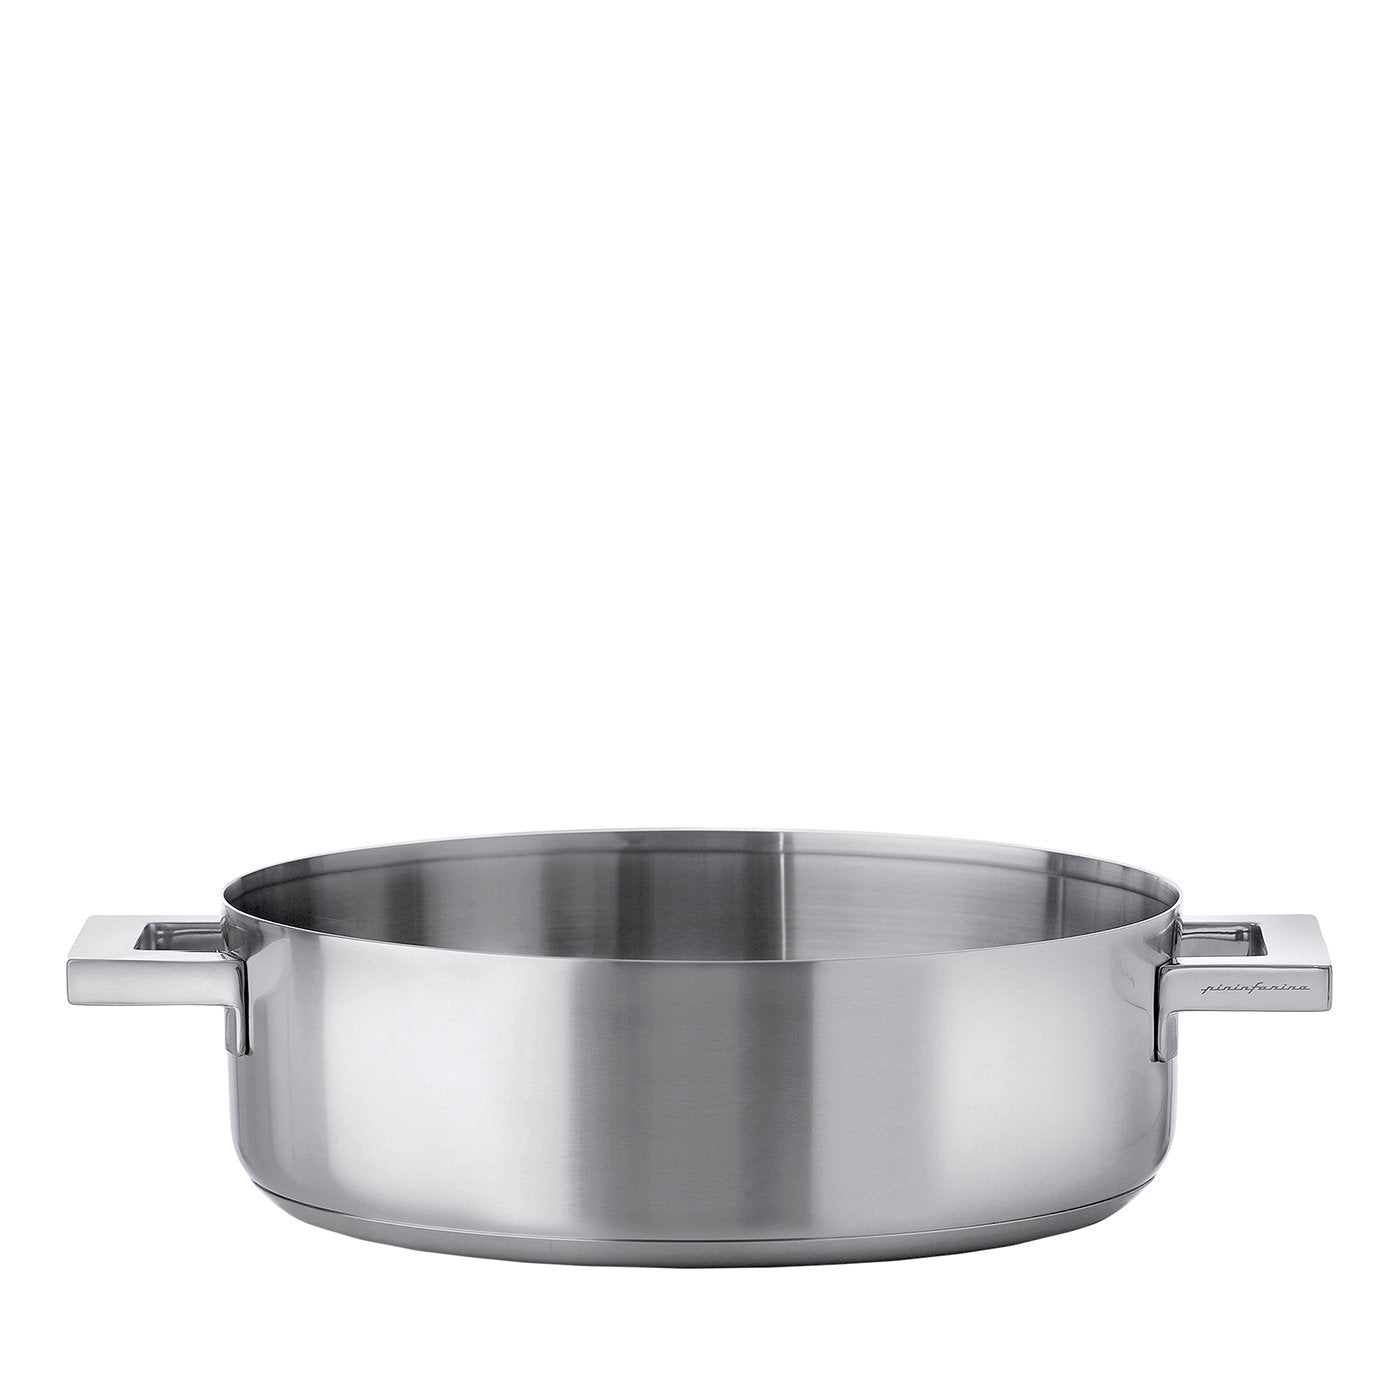 Stile 24cm Frying Pan with 2 Handles with lid - Alternative view 1